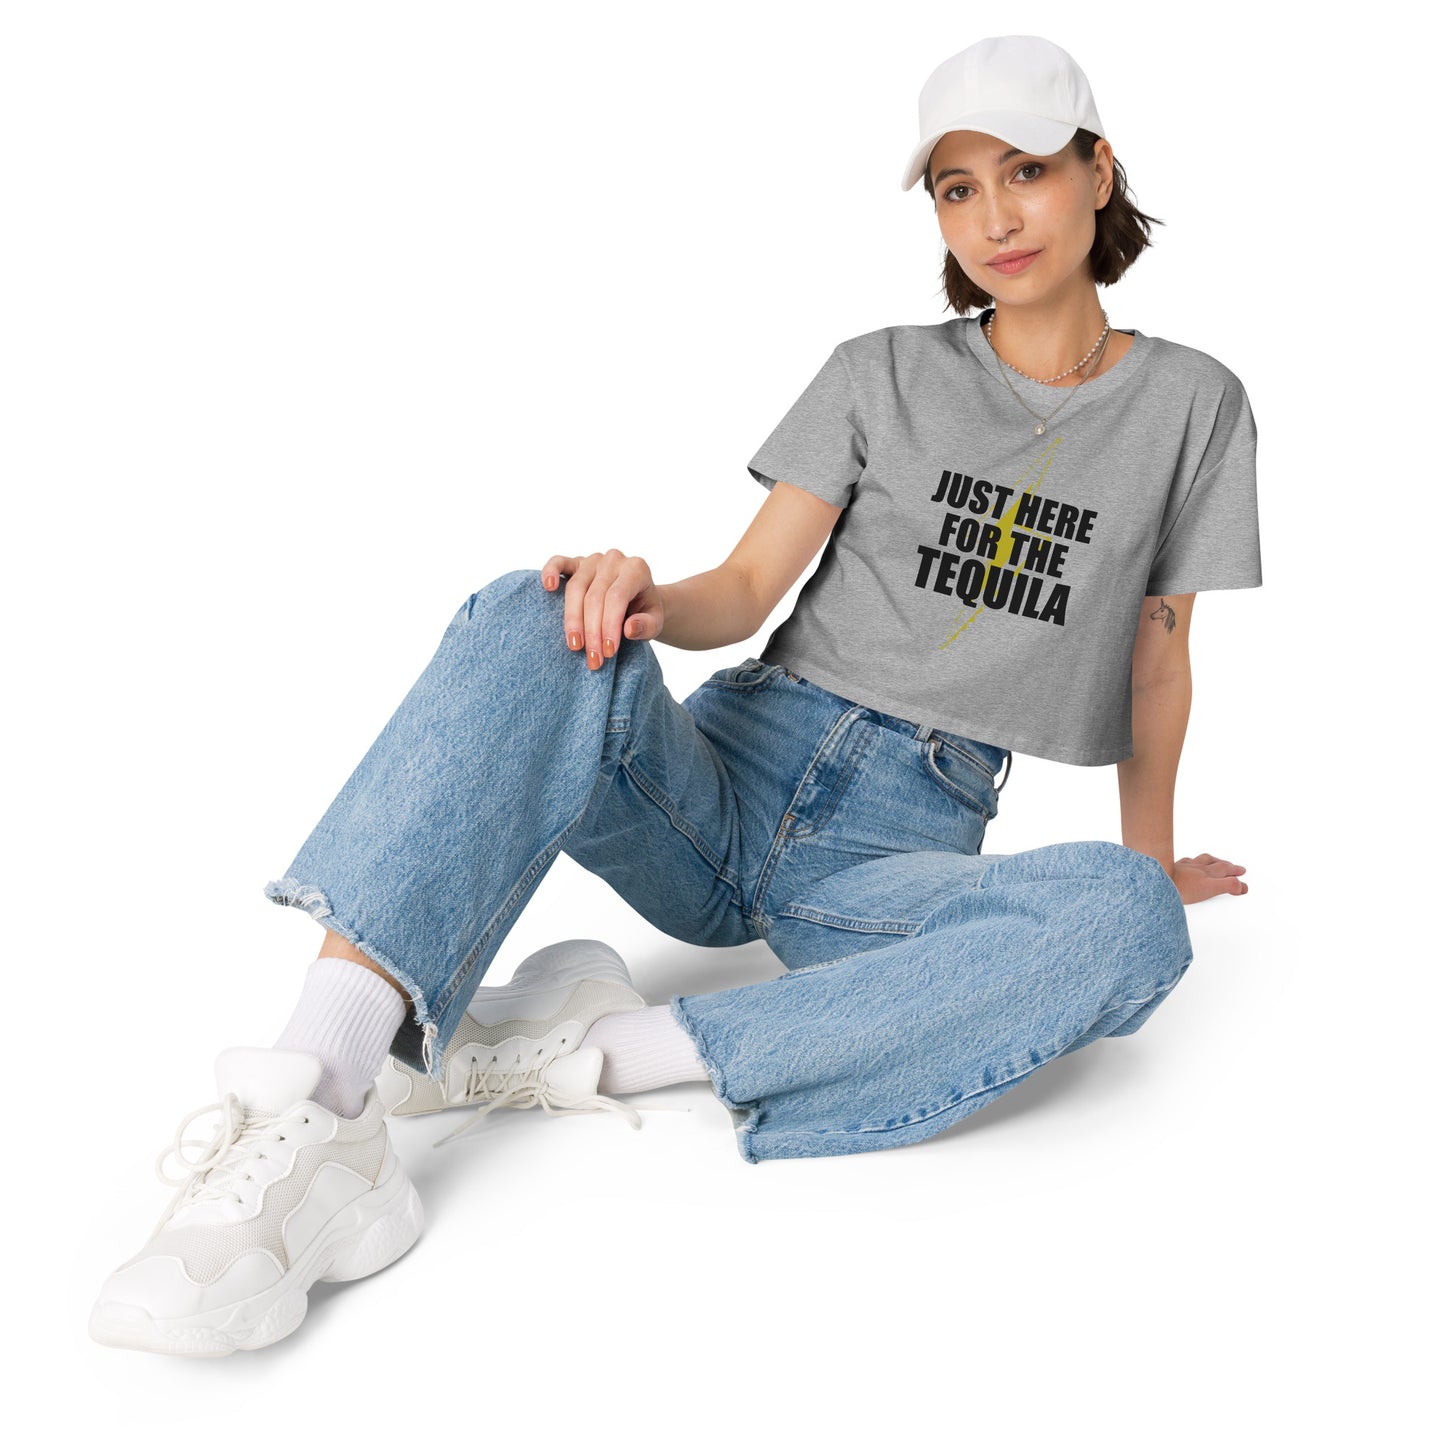 JUST HERE FOR THE TEQUILA / AND NONE OF YOUR BULLSHIT - Women’s crop top